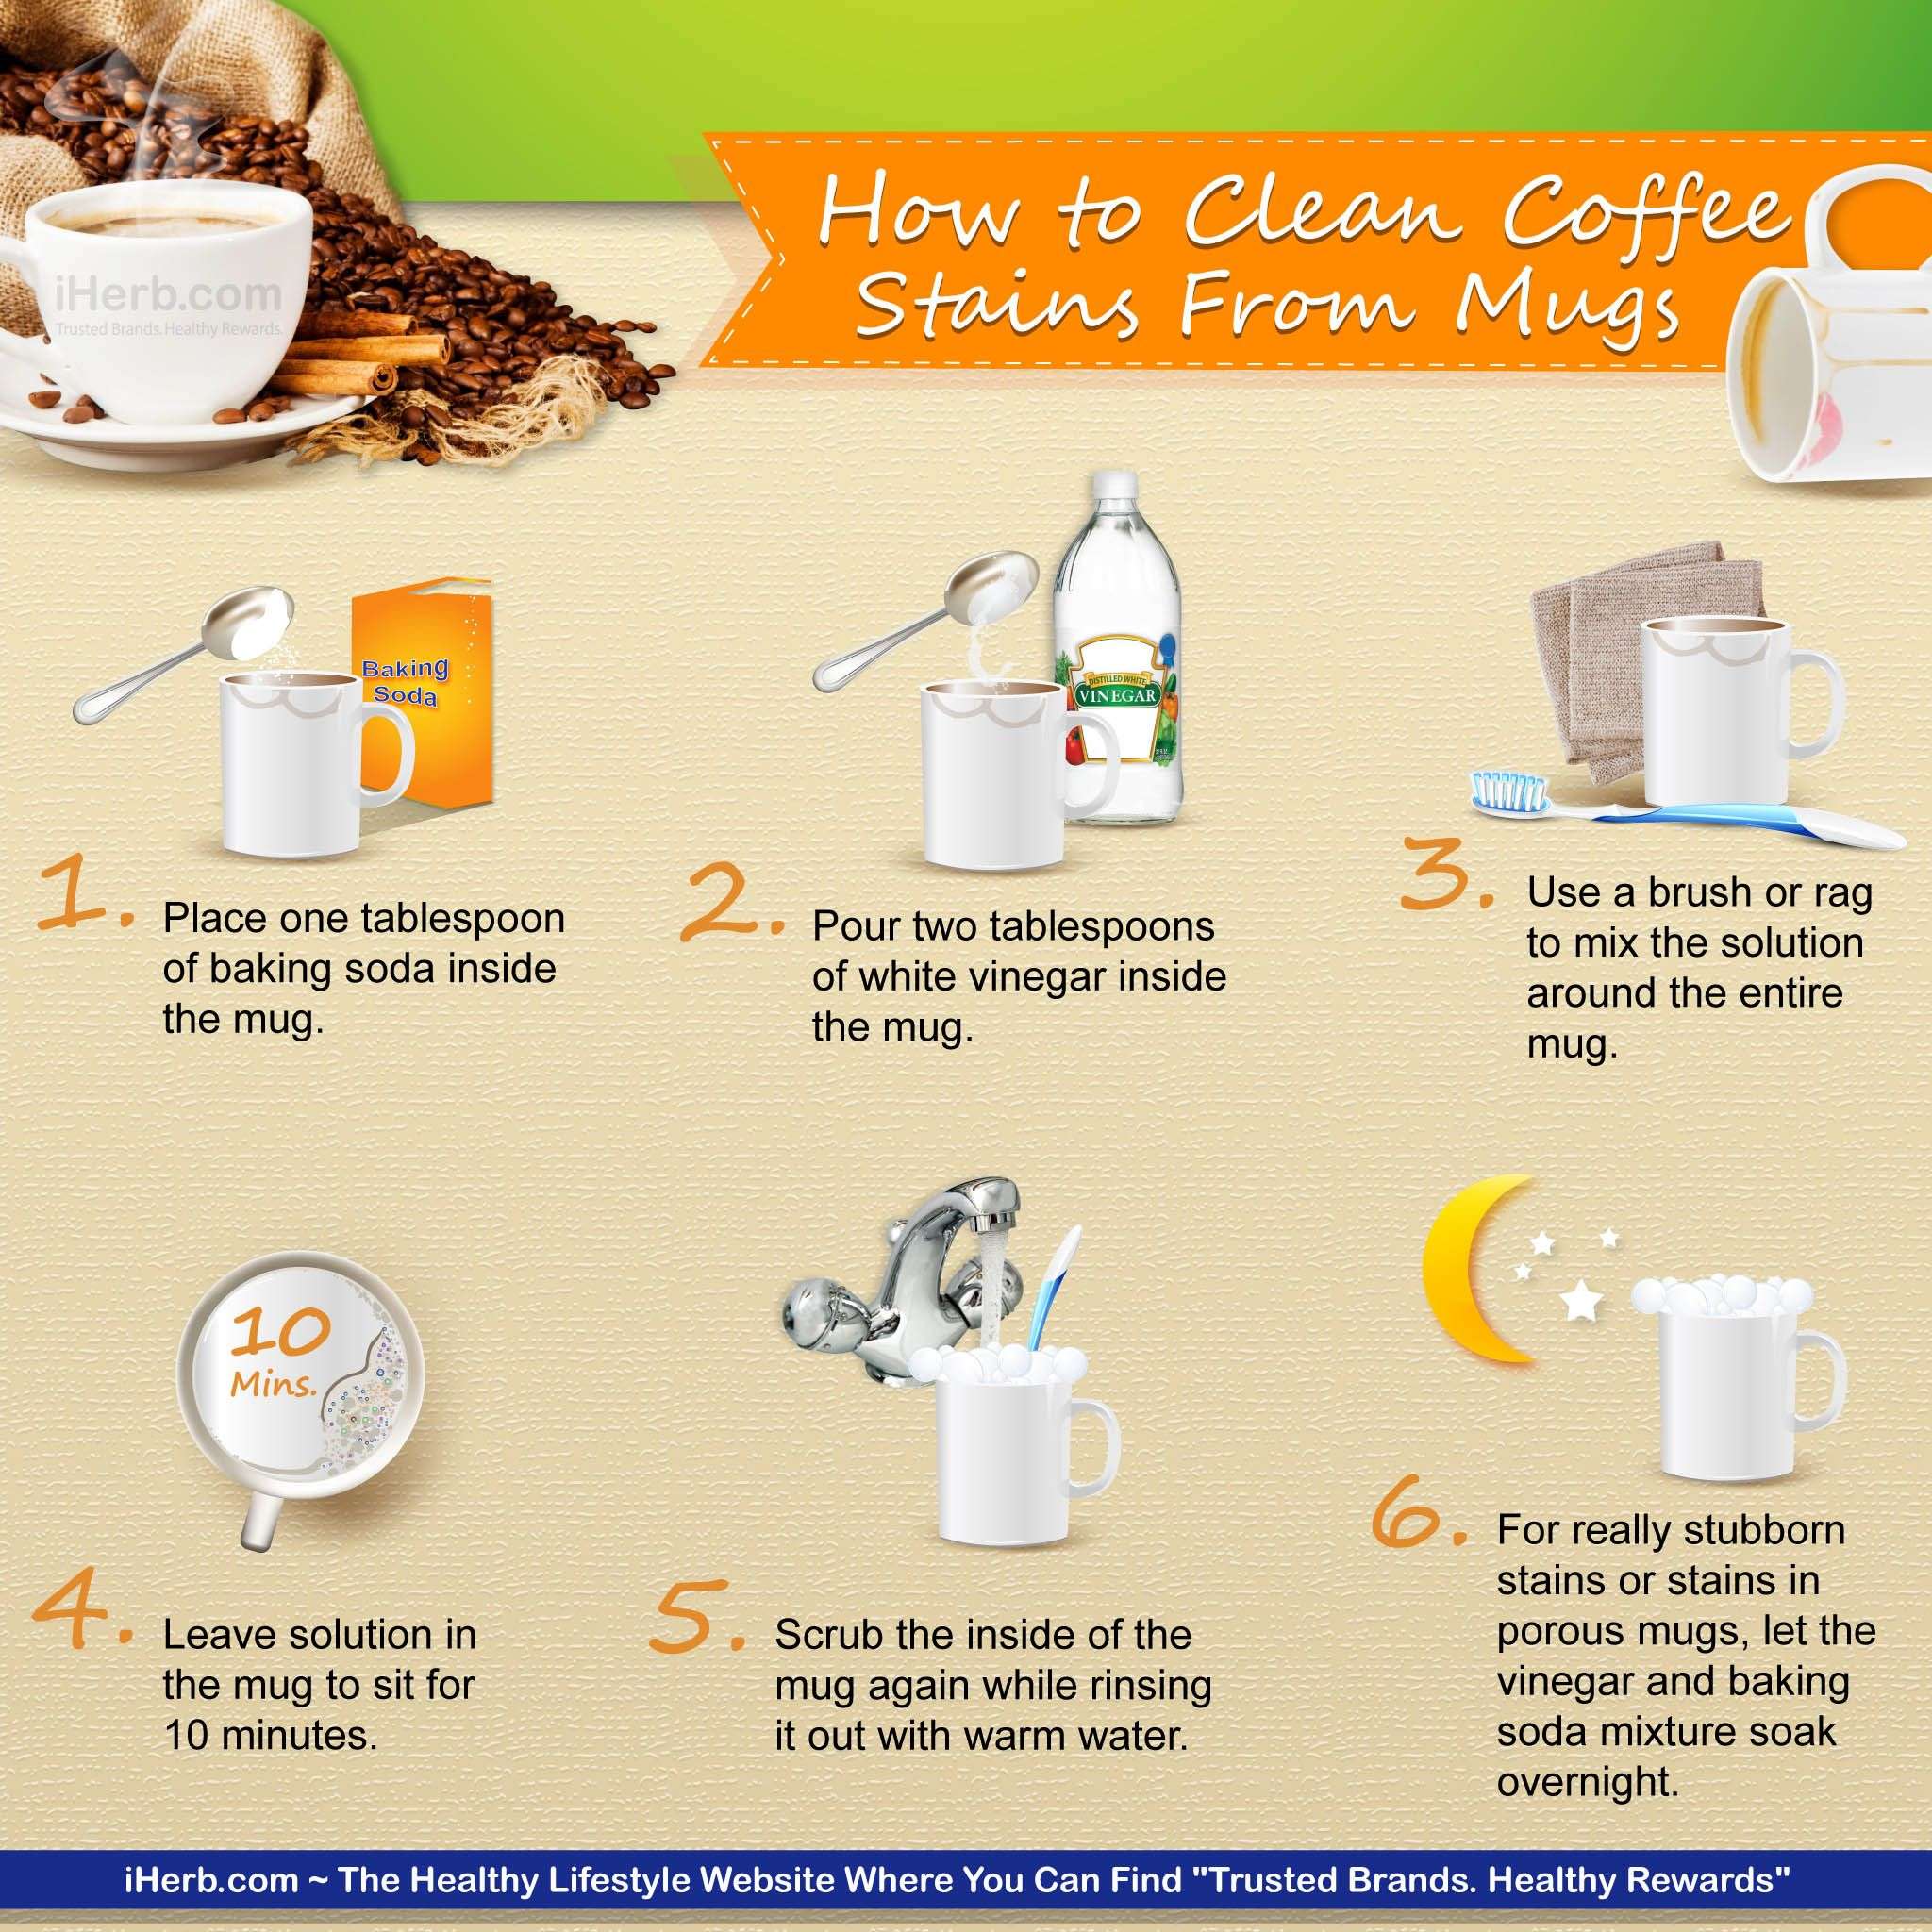 How to Clean Coffee Stains from Mugs